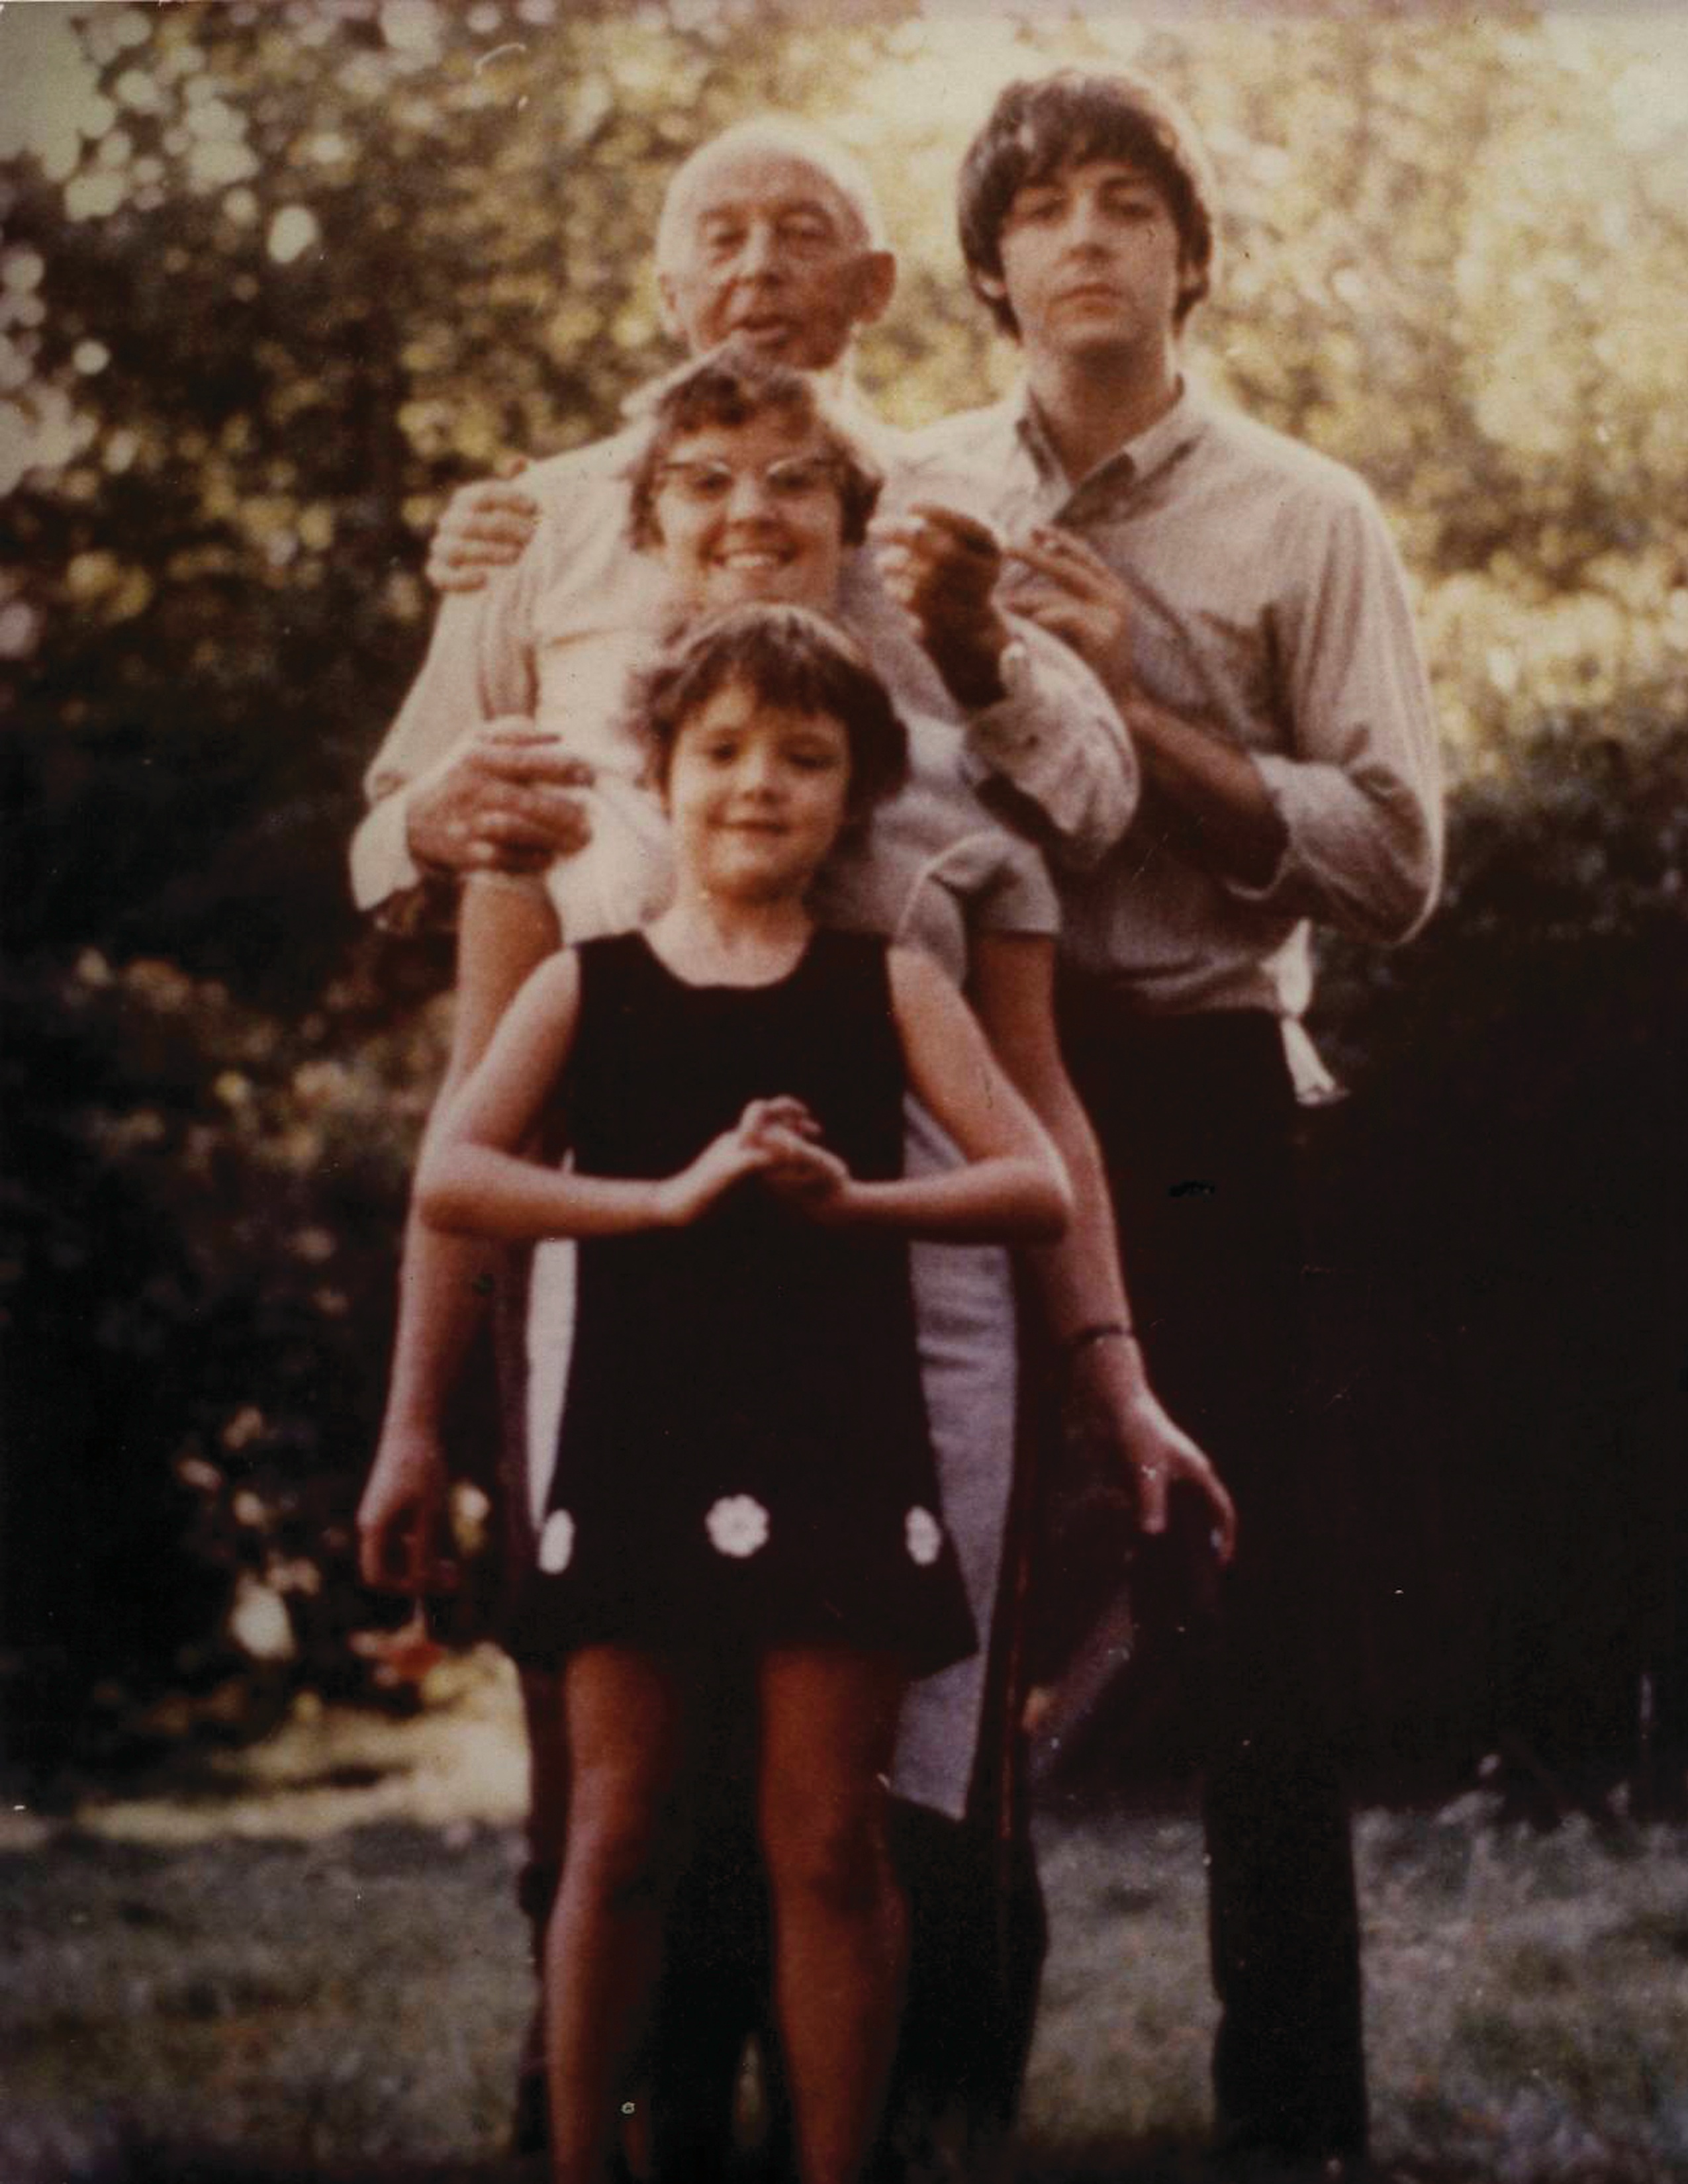 Family photo of Ruth, Angie, Jim and Paul McCartney.